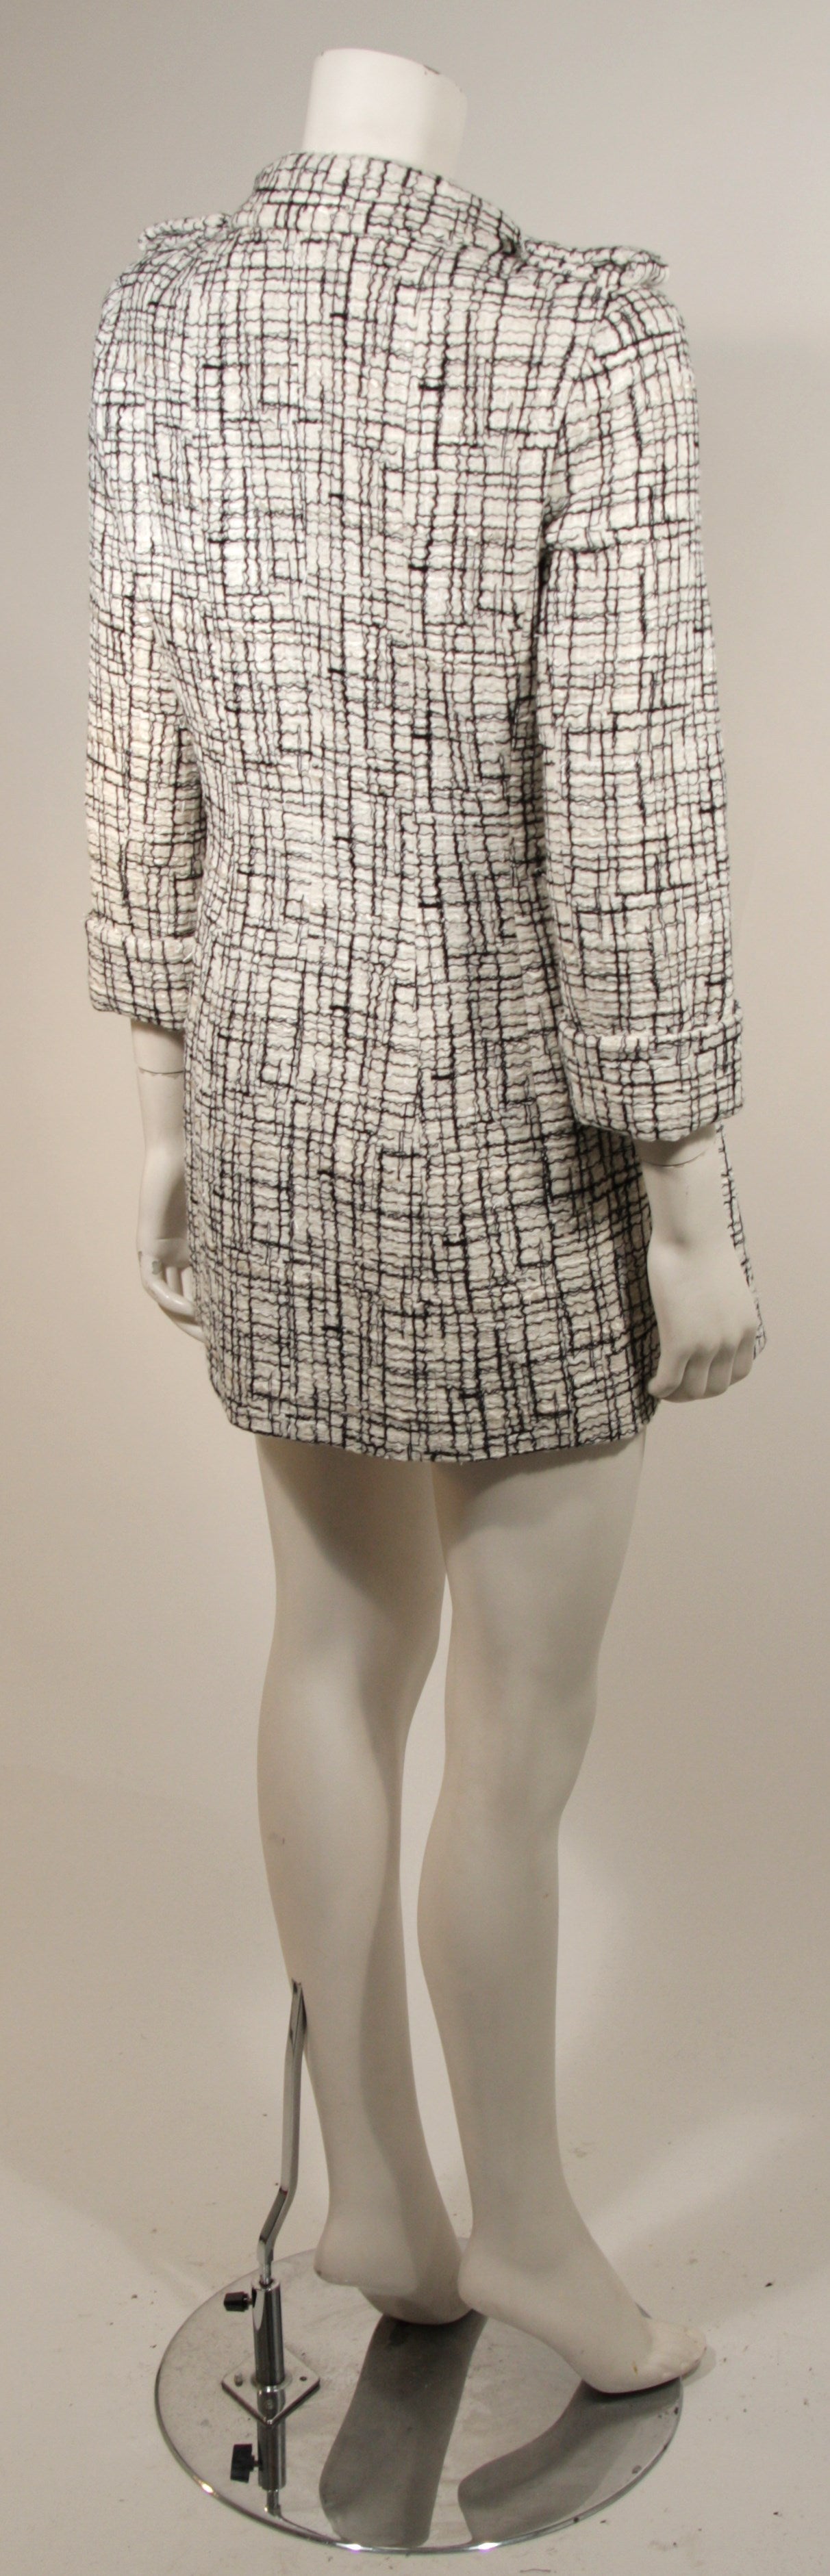 Chanel 2006 Cruise Collection White and Black Tweed Military Style Coat Size 40 2